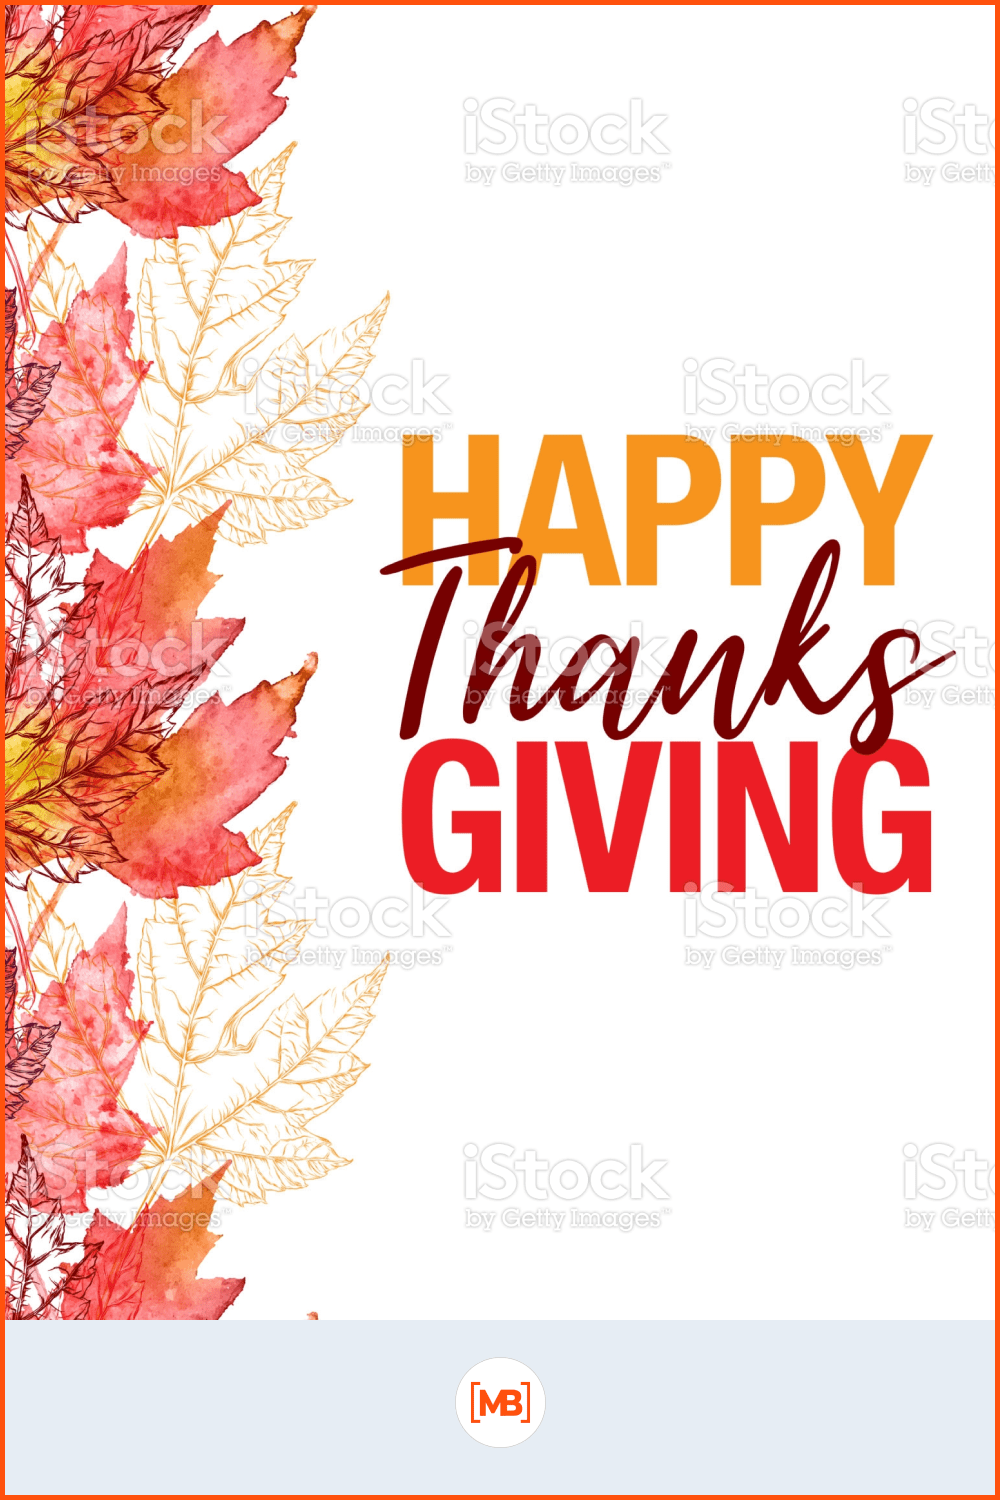 Maple Leaf Vector Watercolor and Ink Seamless Pattern with Happy Thanksgiving Greeting stock illustration.